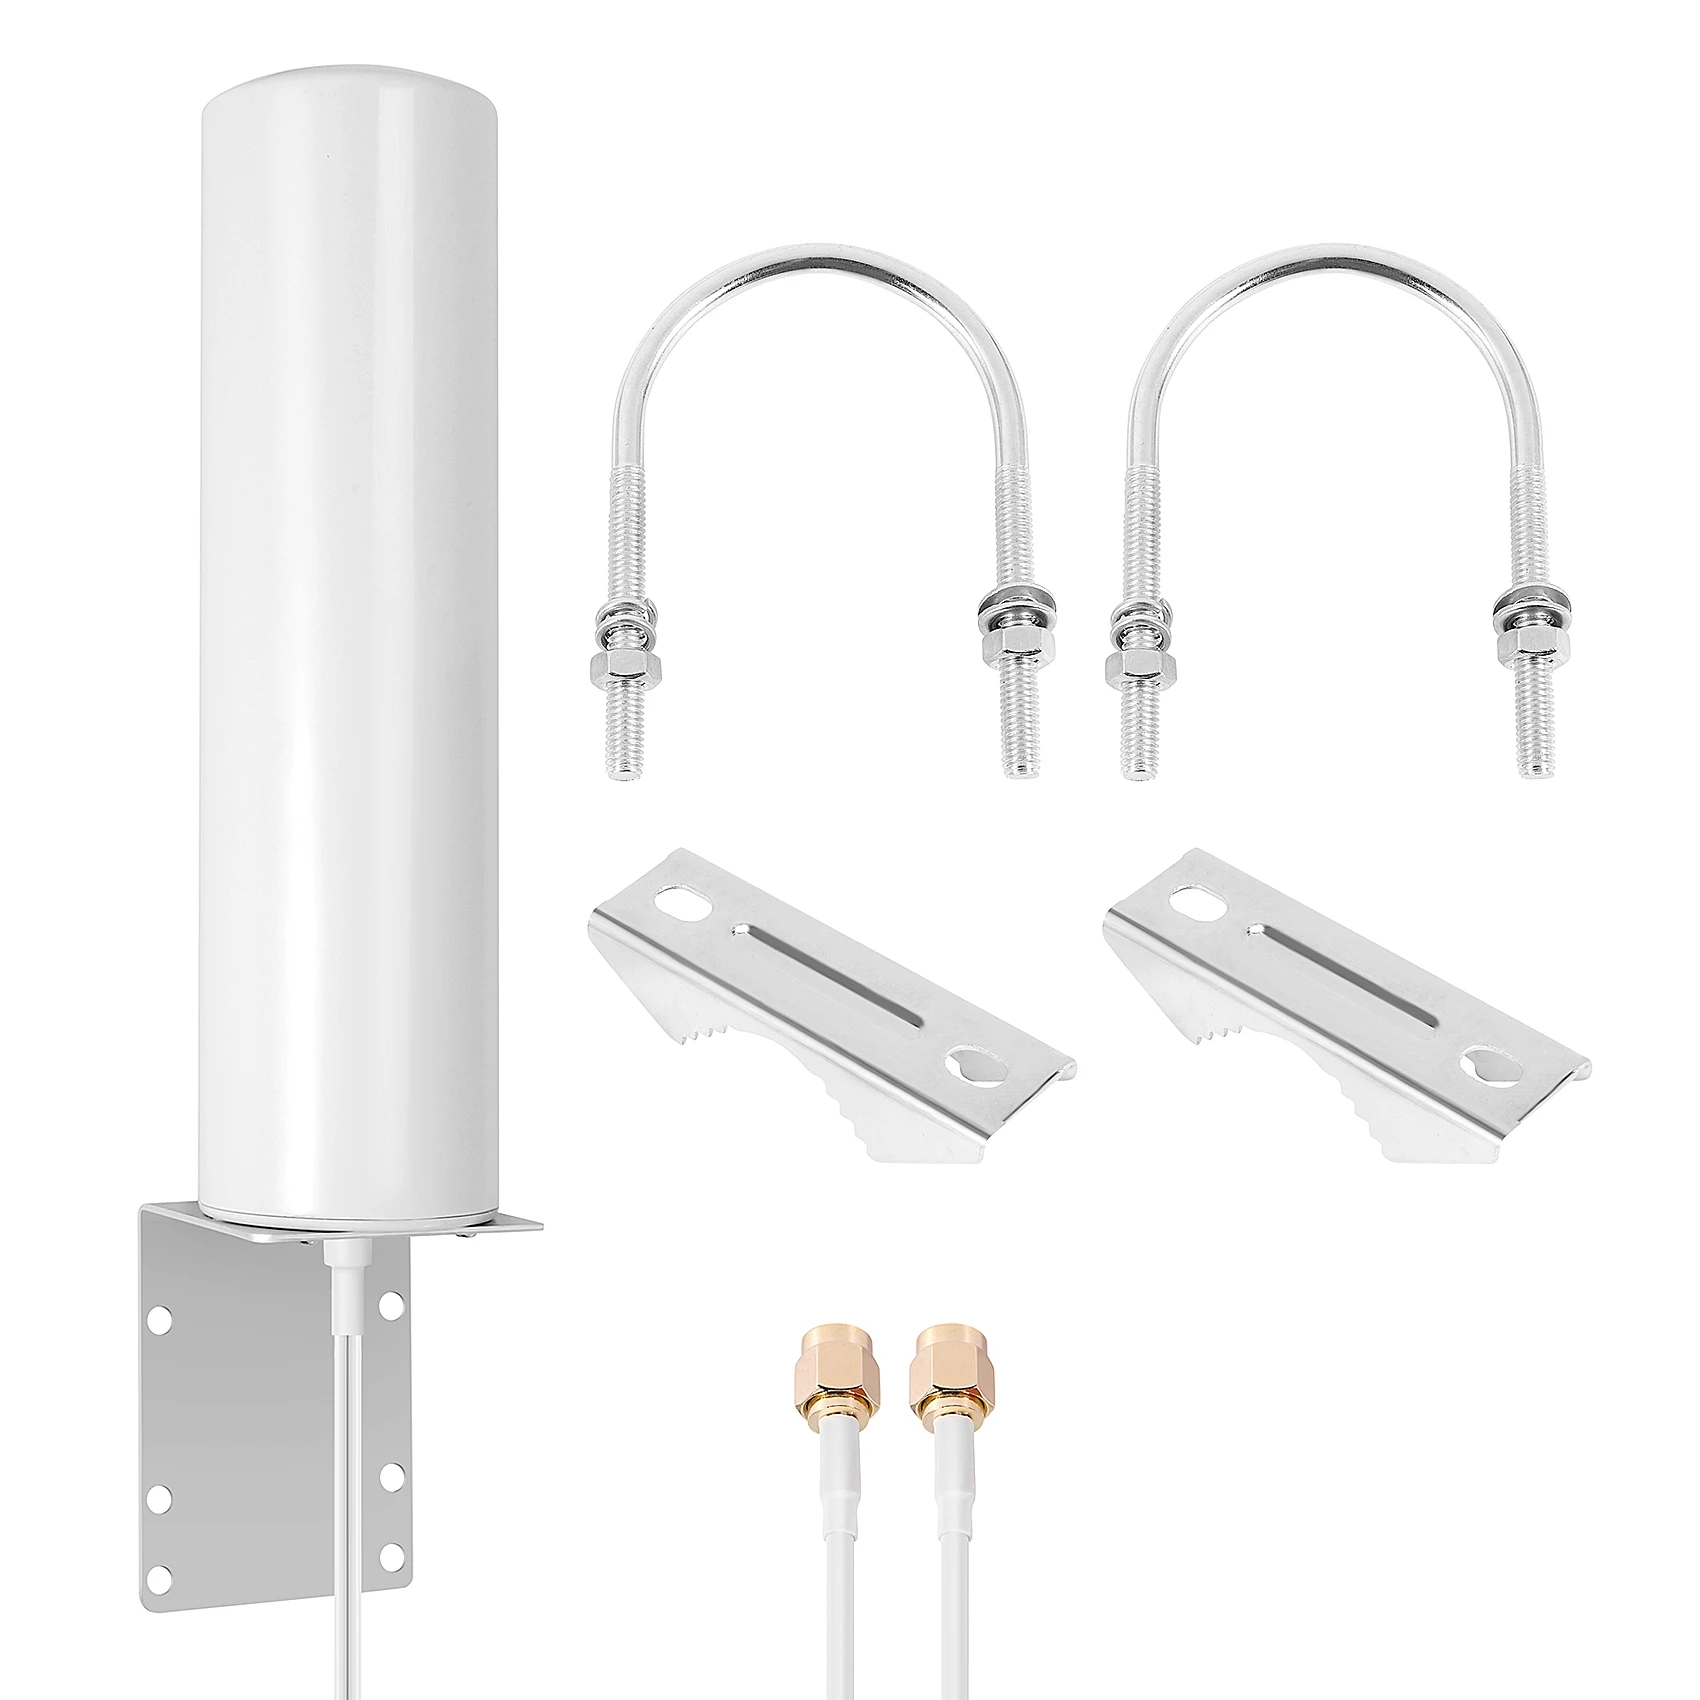 

3G 4G LTE External Antenna Outdoor with 5M Dual SlIder SMA Connector for 3G 4G Router Modem